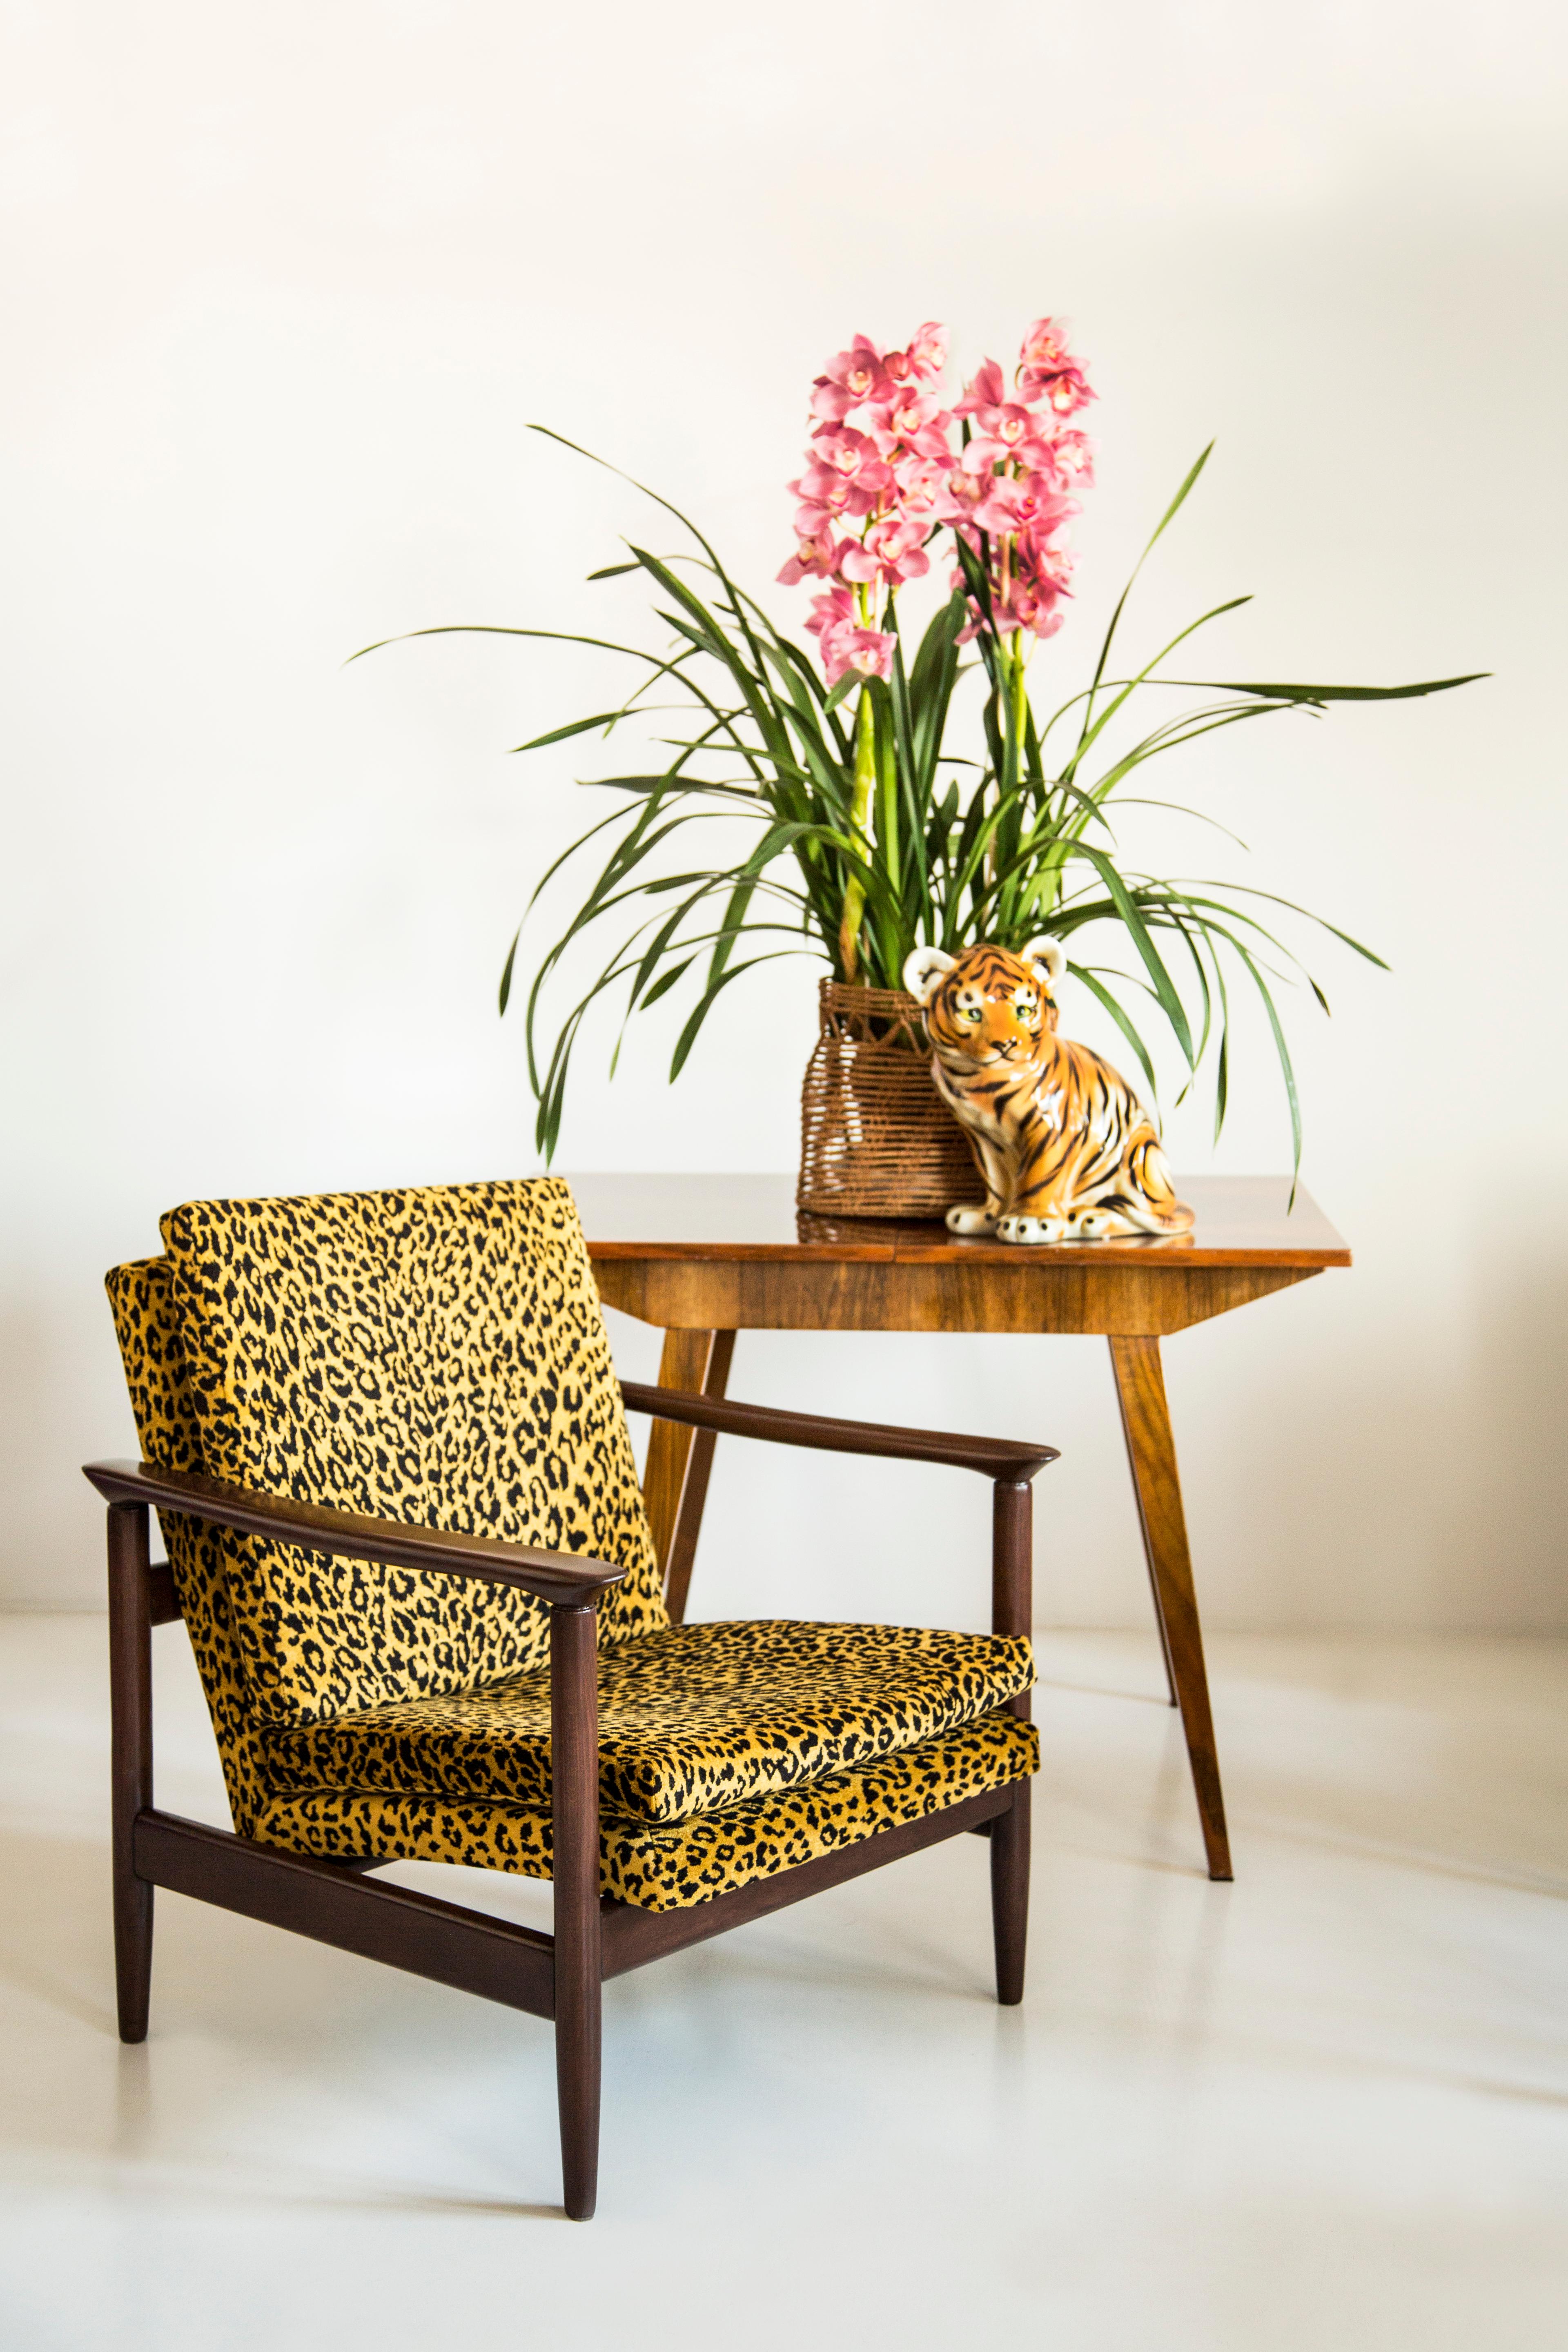 Hand-Crafted Pair of Midcentury Leopard Armchairs, GFM 142, Edmund Homa, Europe, 1960s For Sale